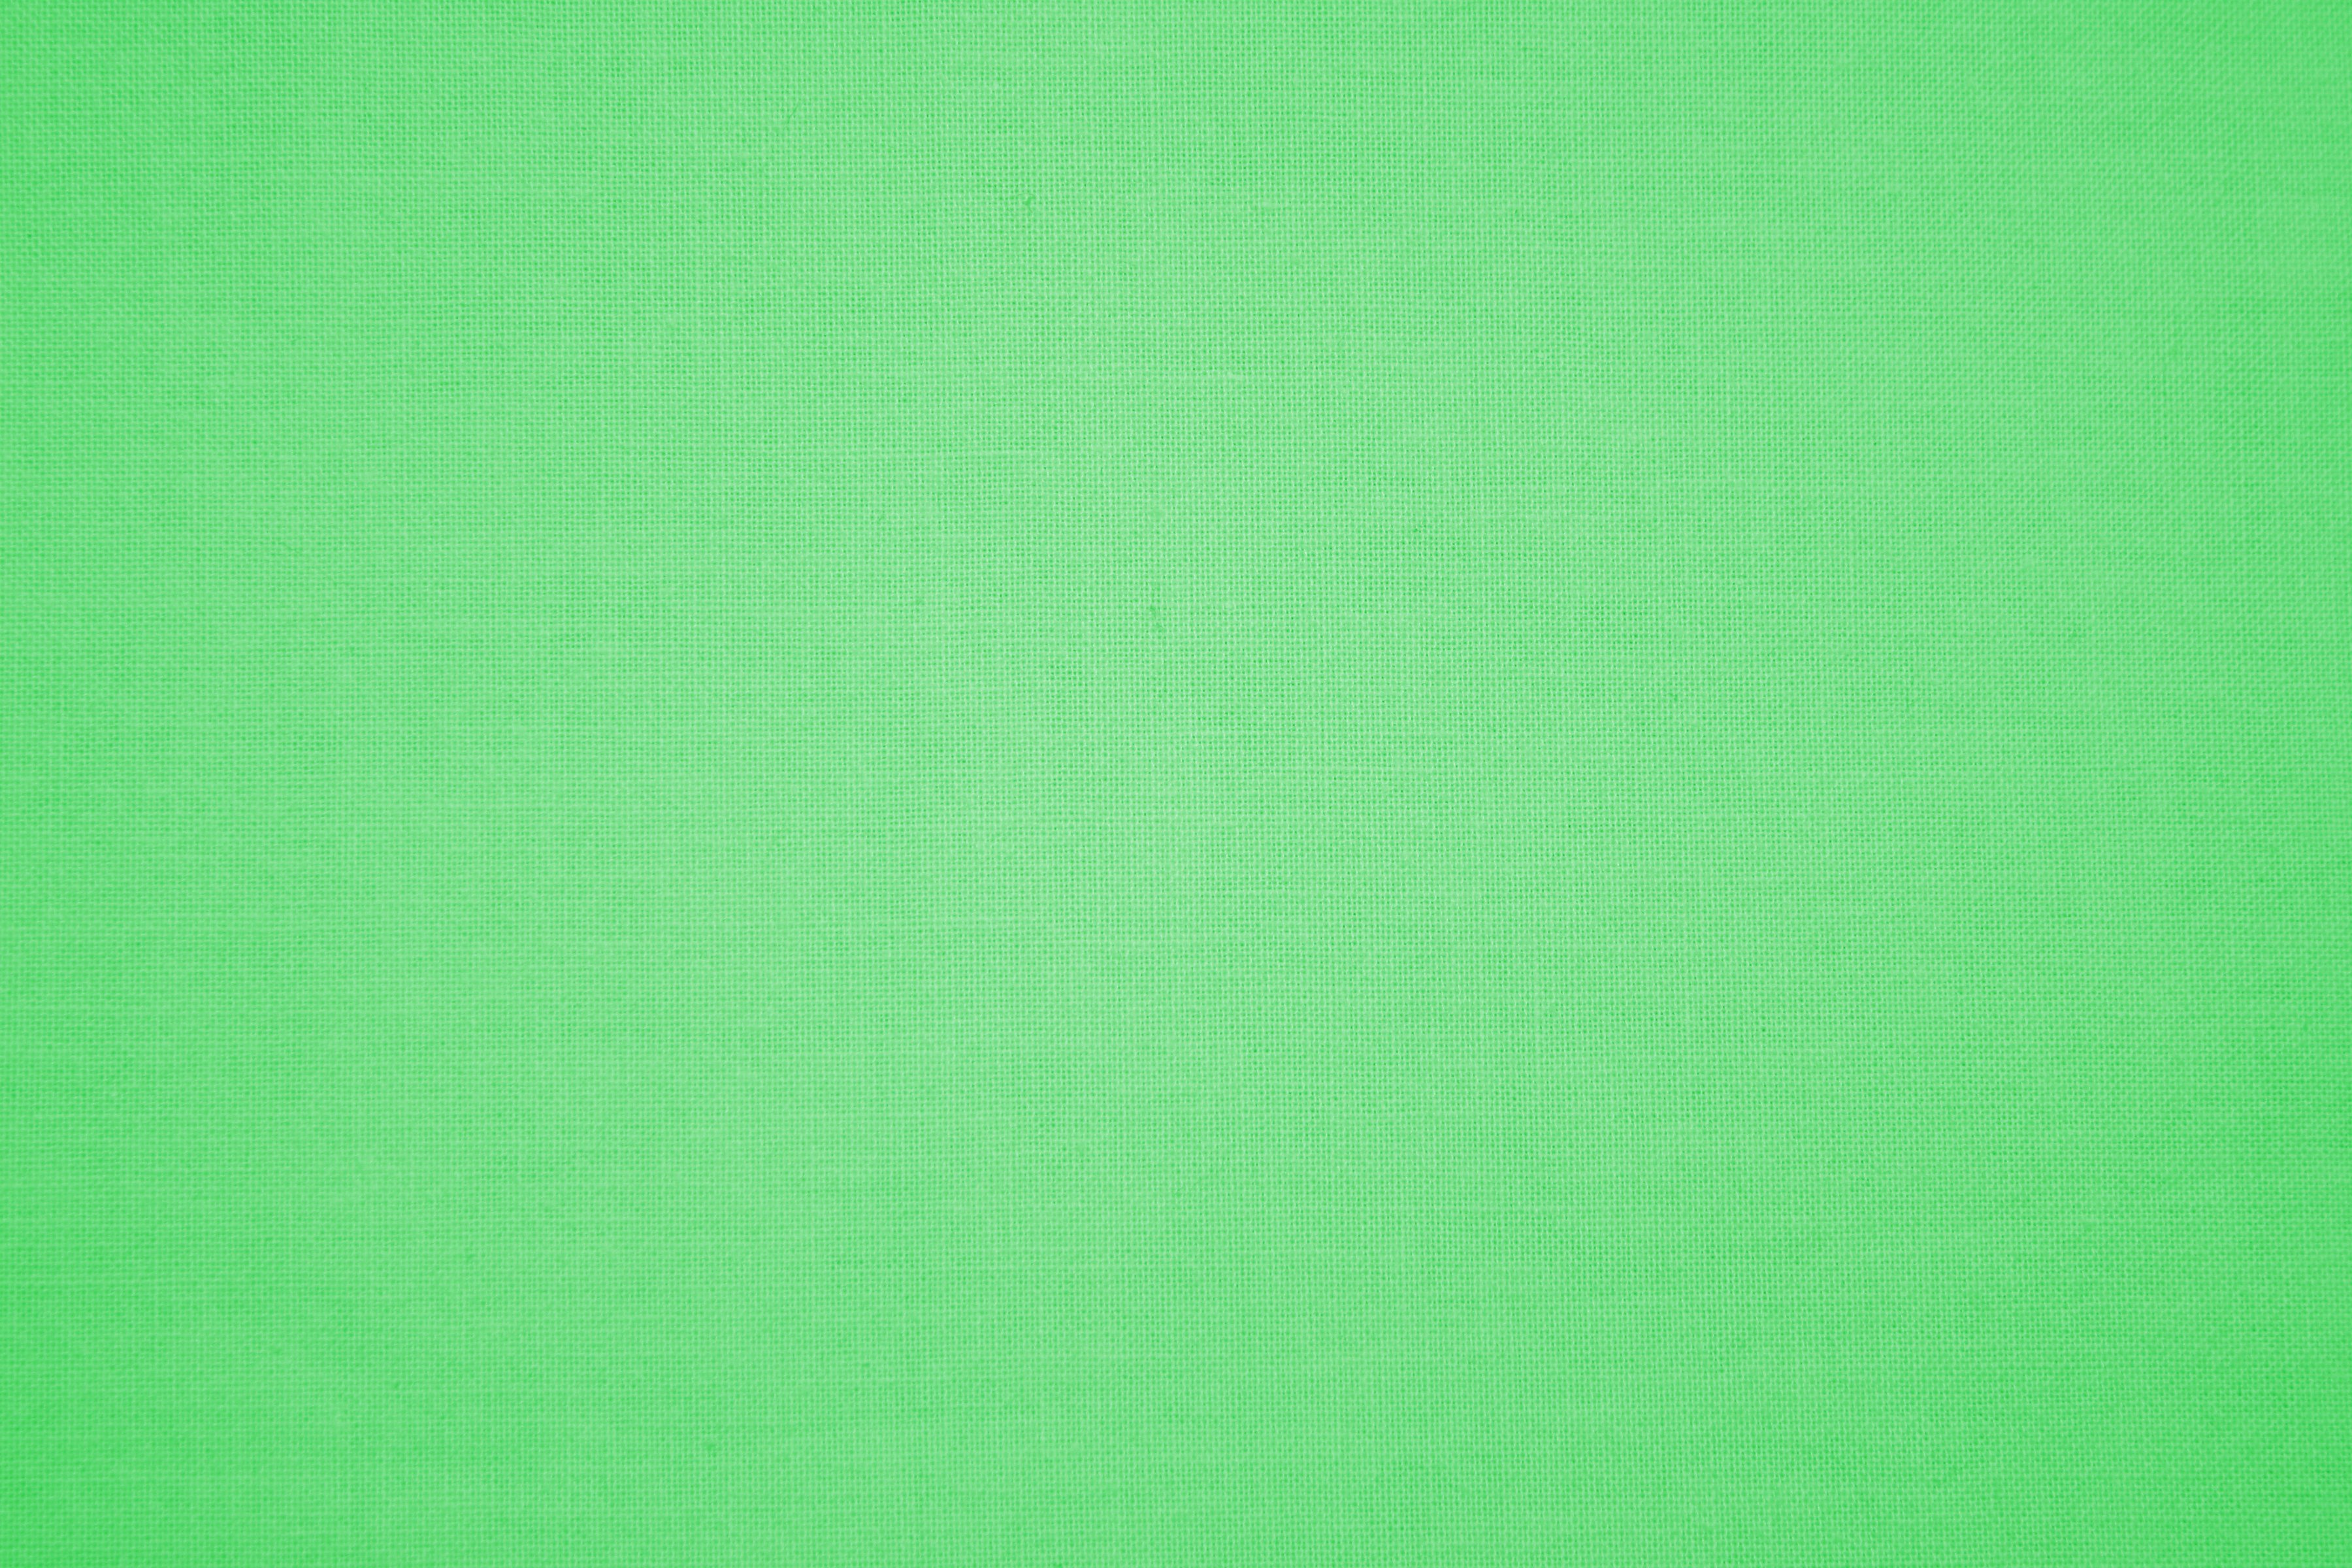 Light Green Background Image Amp Pictures Becuo